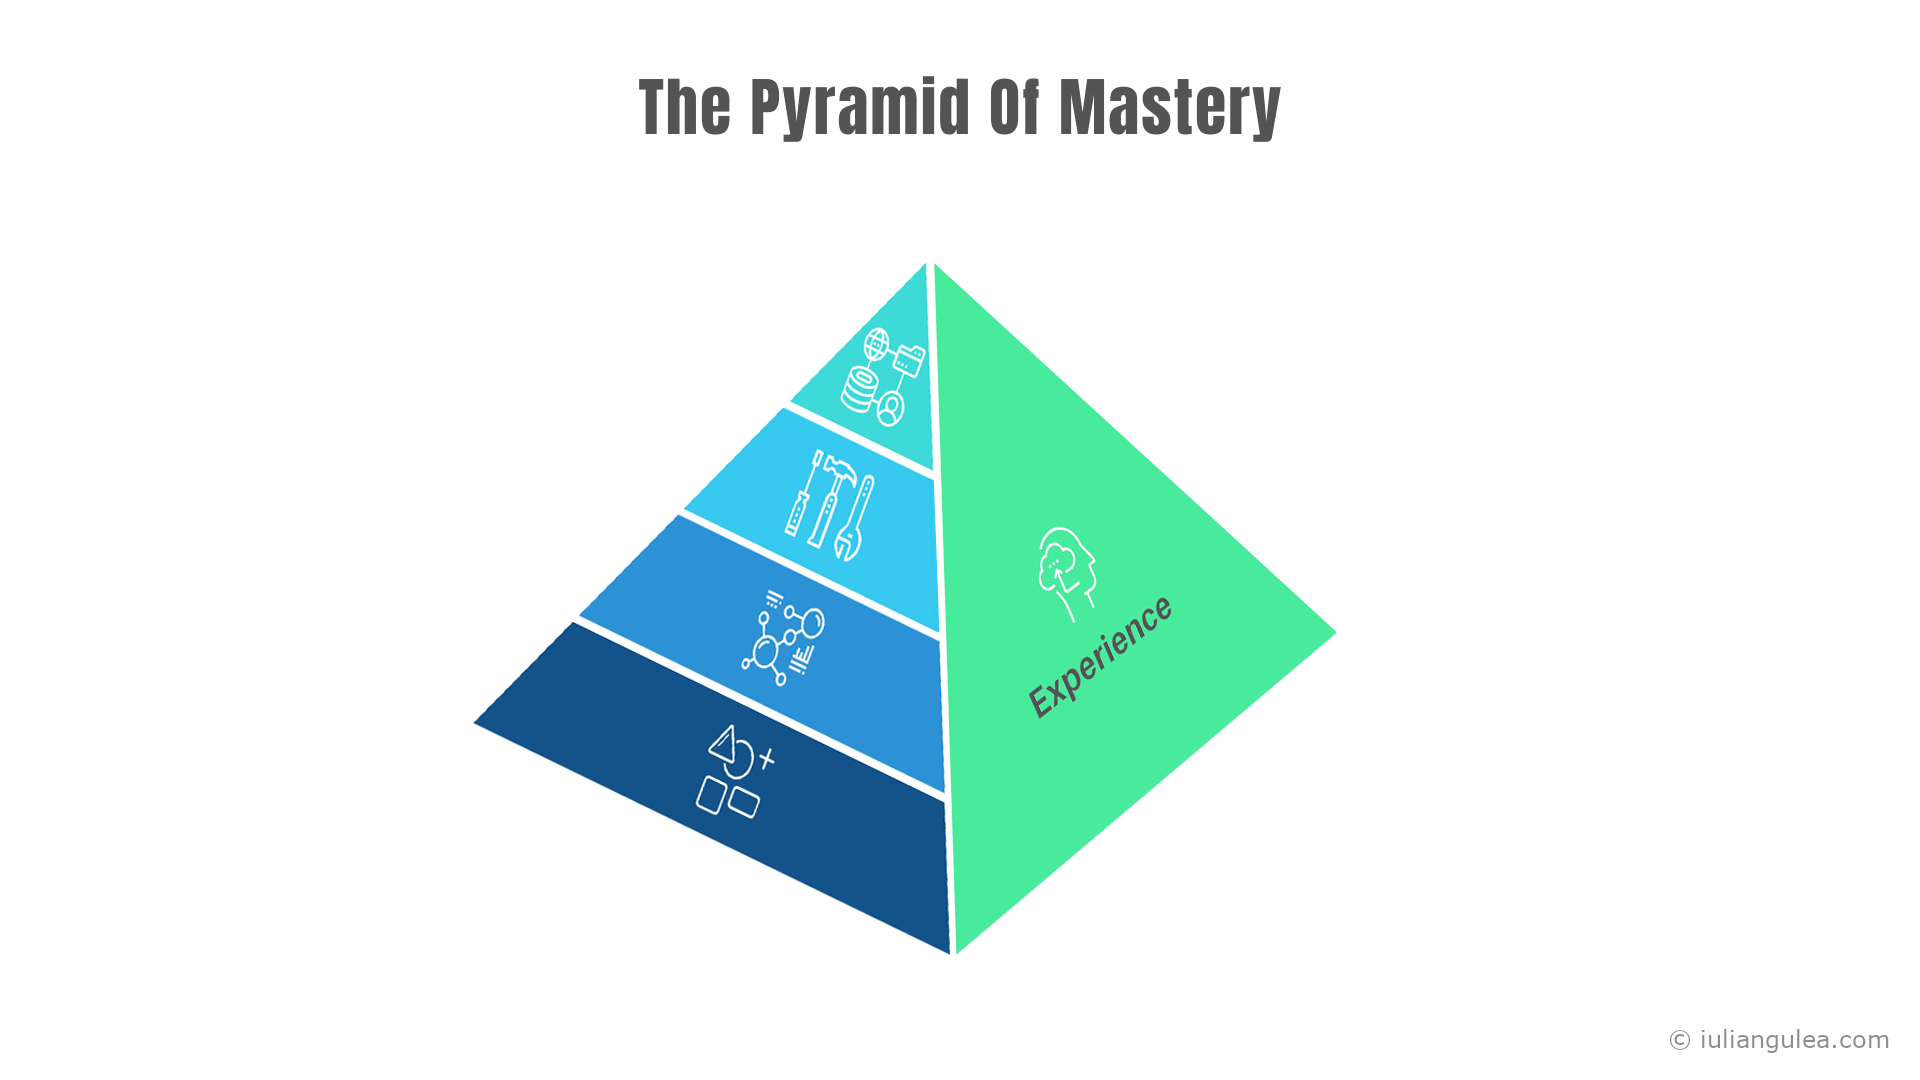 Pyramid of Mastery - the side of experience